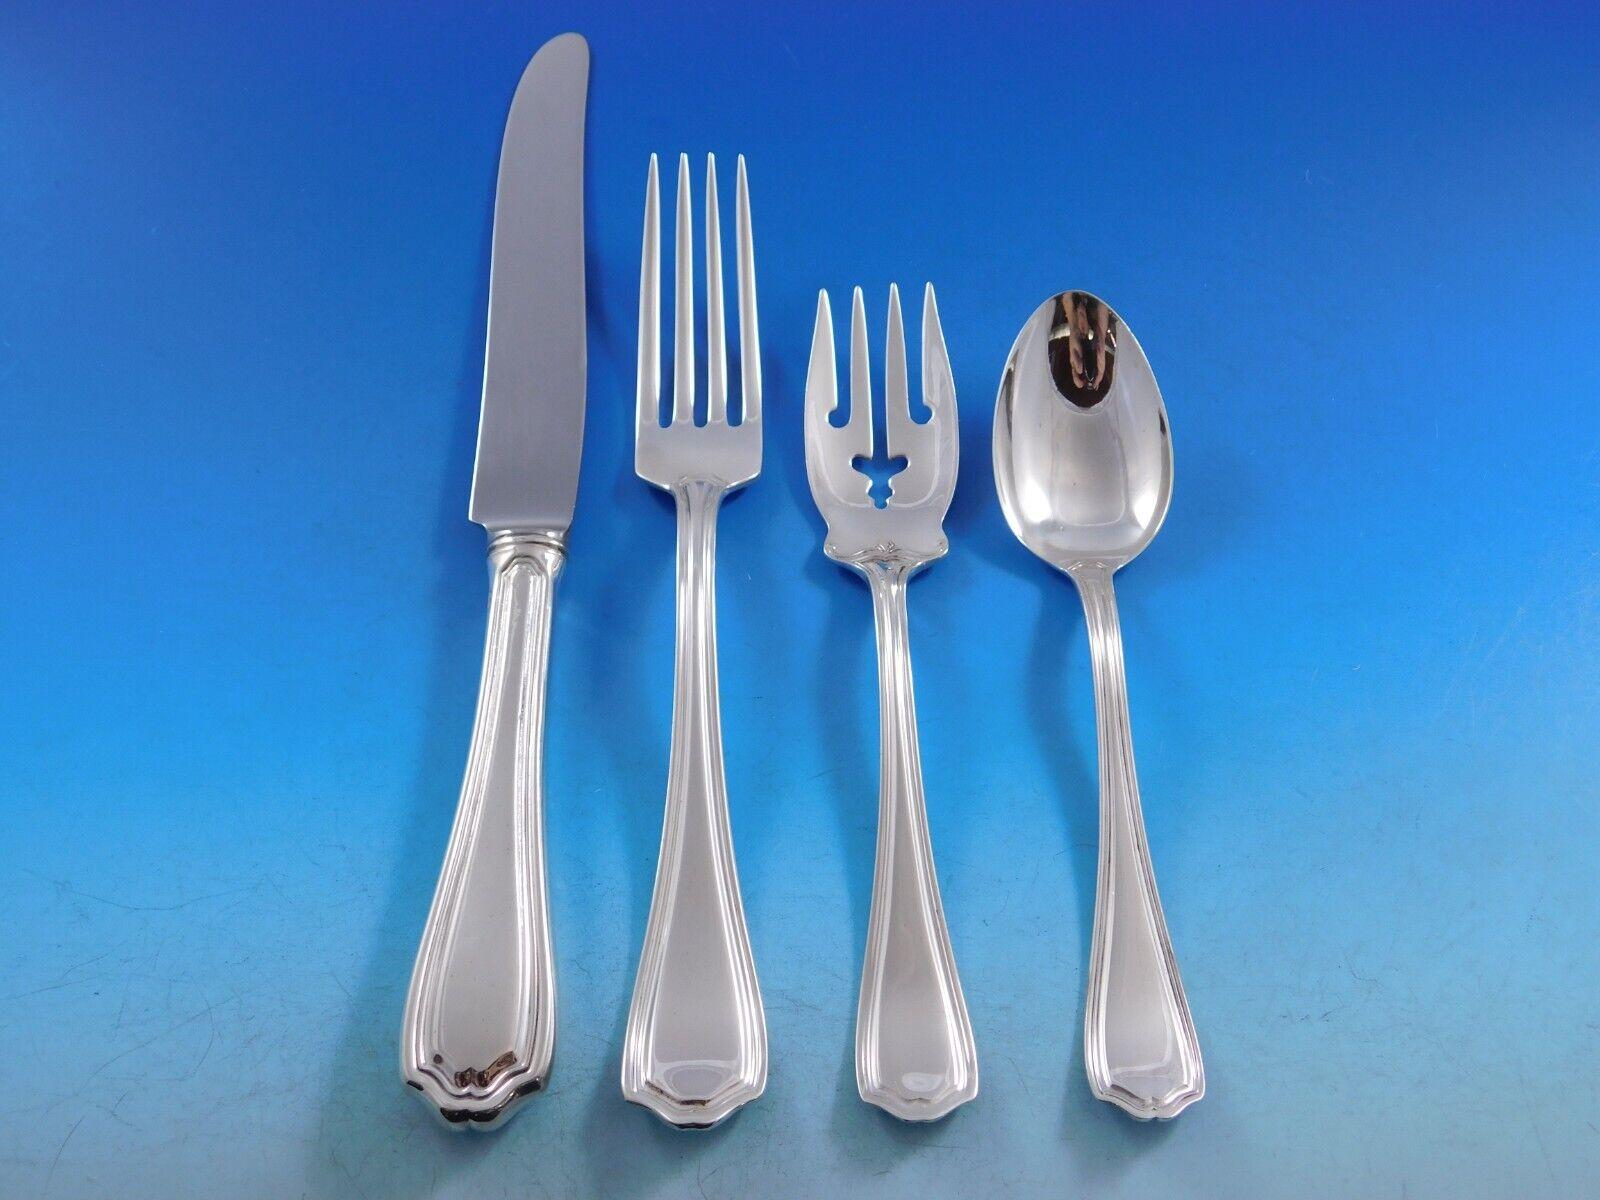 Hepplewhite by Reed & Barton sterling silver Flatware set, 43 pieces. This tailored, timeless pattern is a best seller. This set includes:

8 Regular Knives, 9 1/4